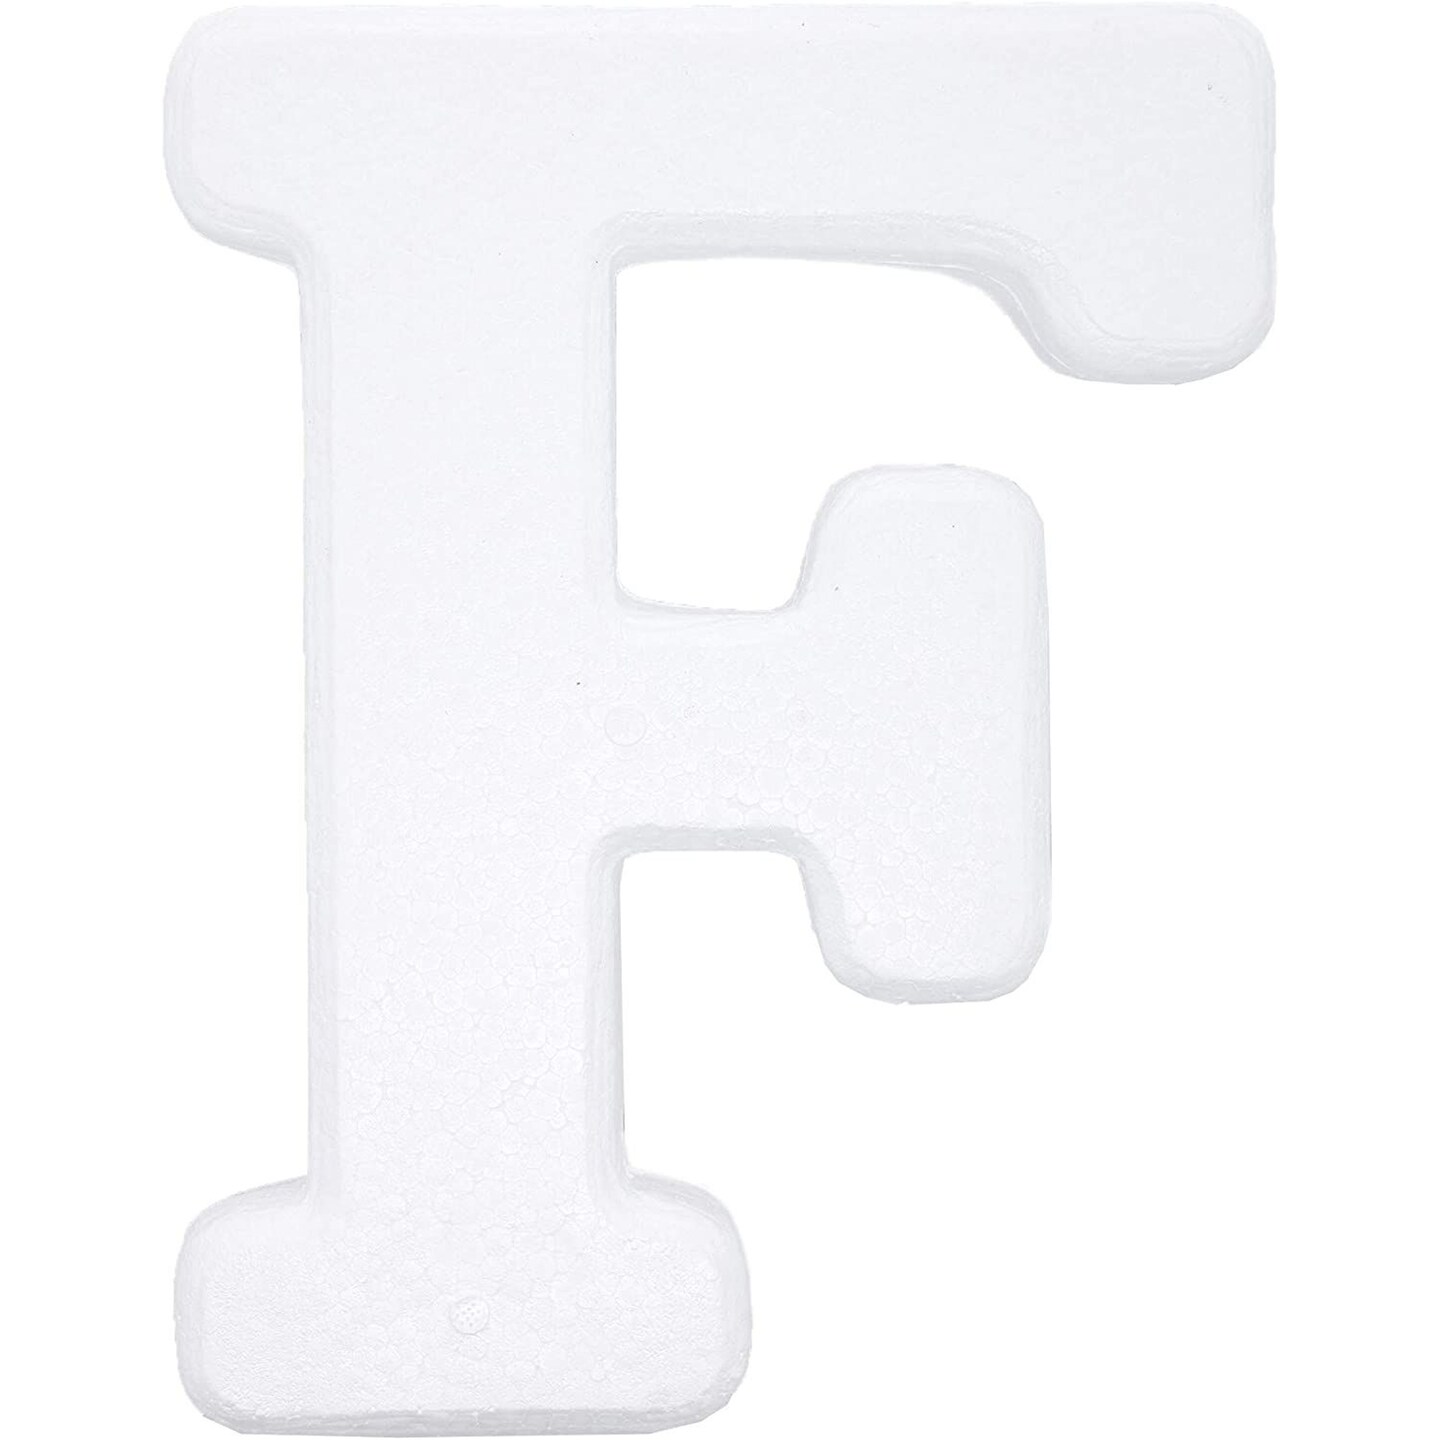 White Wood Letters 6 Inch, Wood Letters for DIY Party Projects (W